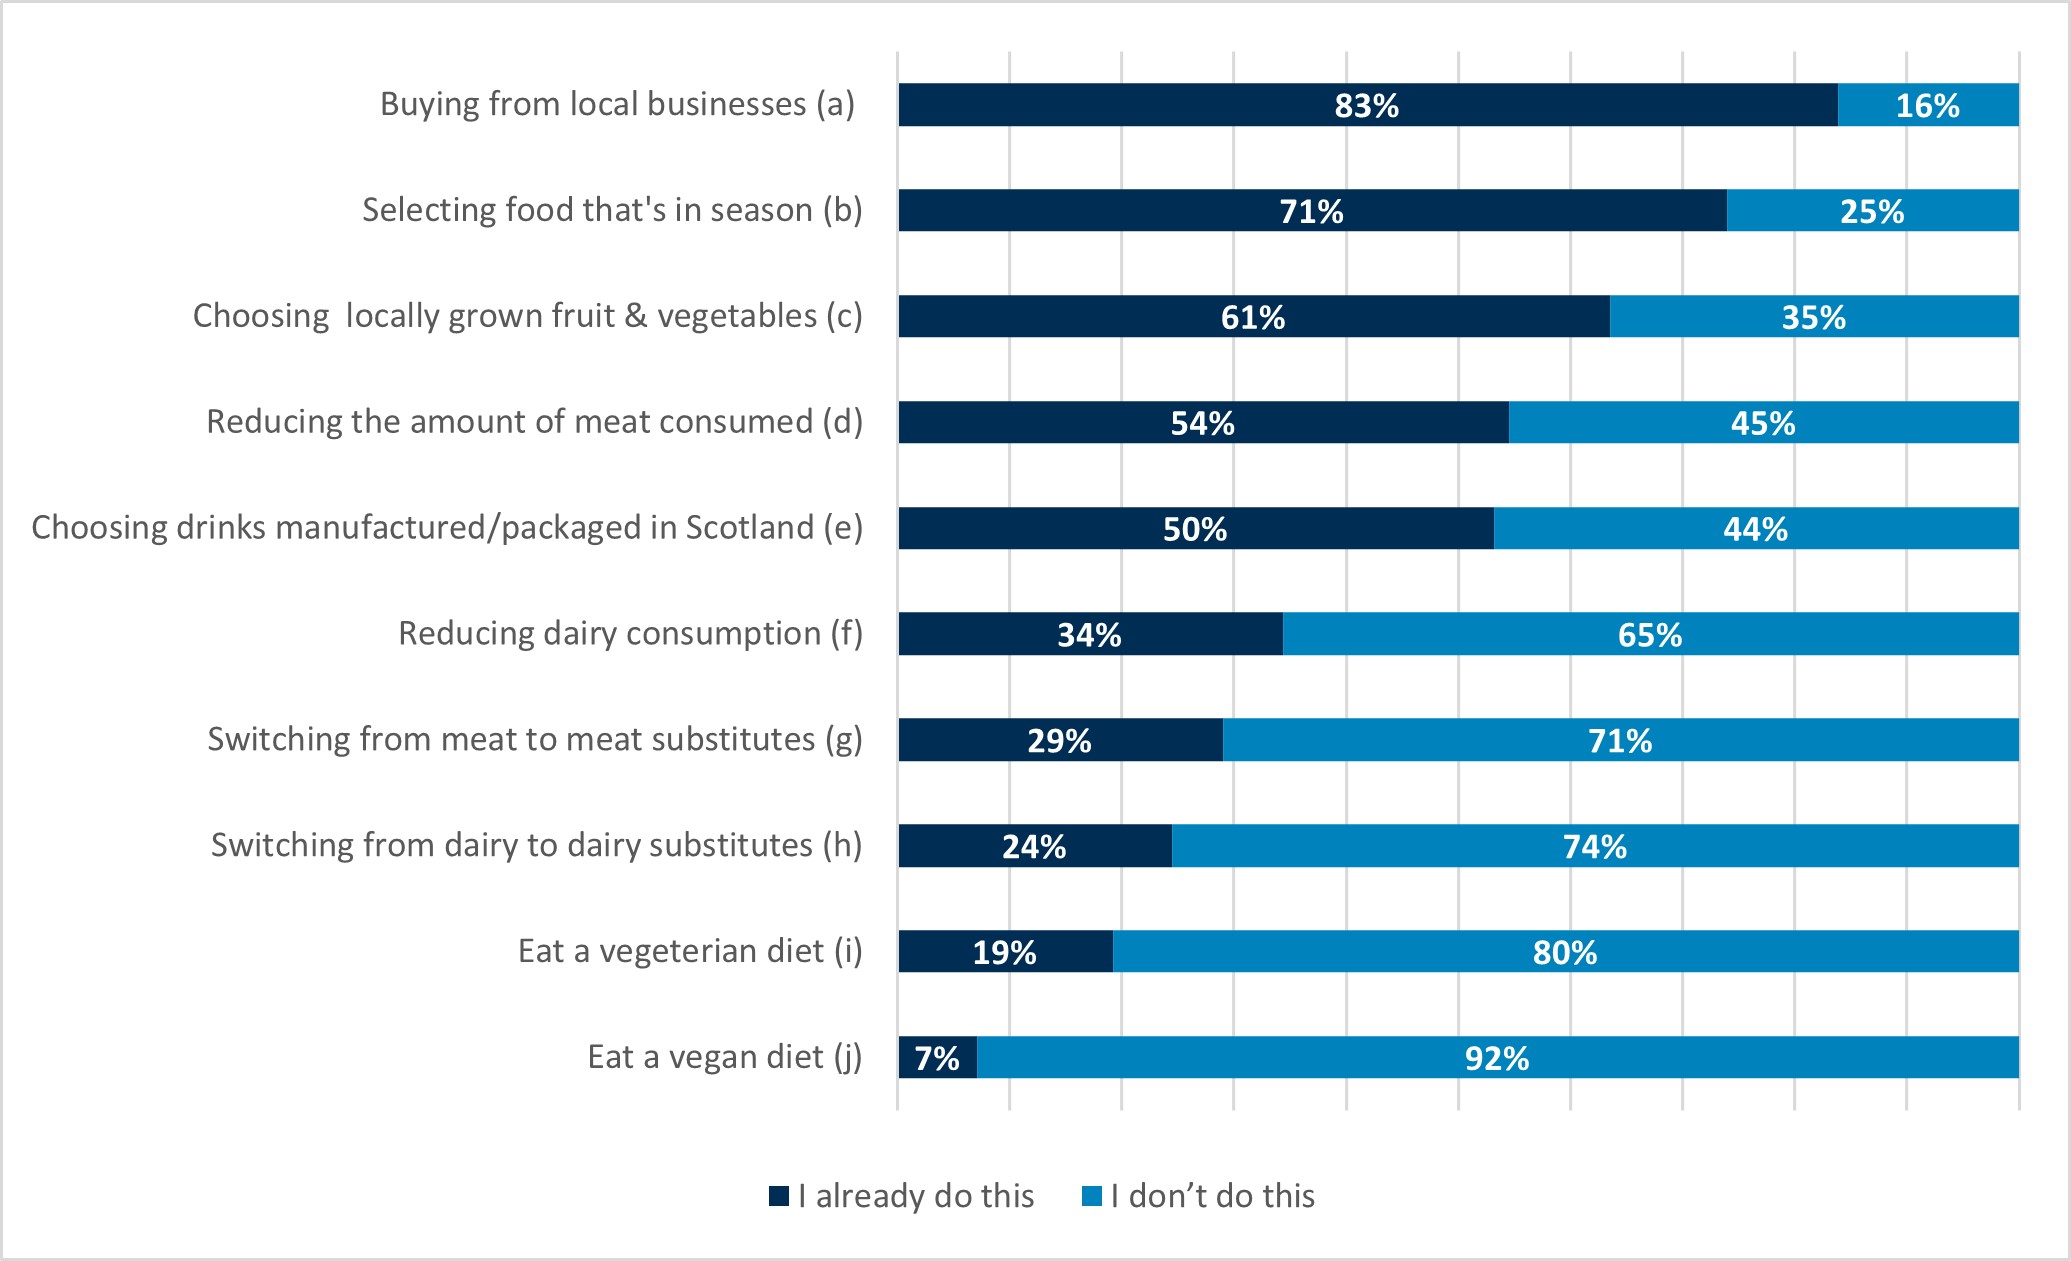 Data showing 83% of respondents state they buy from local businesses, 71% state they select food that is in season, and almost two thirds (61%) state they choose locally grown fruit and vegetables . 54% state they have already reduced the amount of meat they consume, with 45% stating they have not. Currently in Scotland, only 7% of respondents state to have switched to a vegan diet. 80% of respondents have not moved to a vegetarian diet and 74% have not moved to dairy substitutes